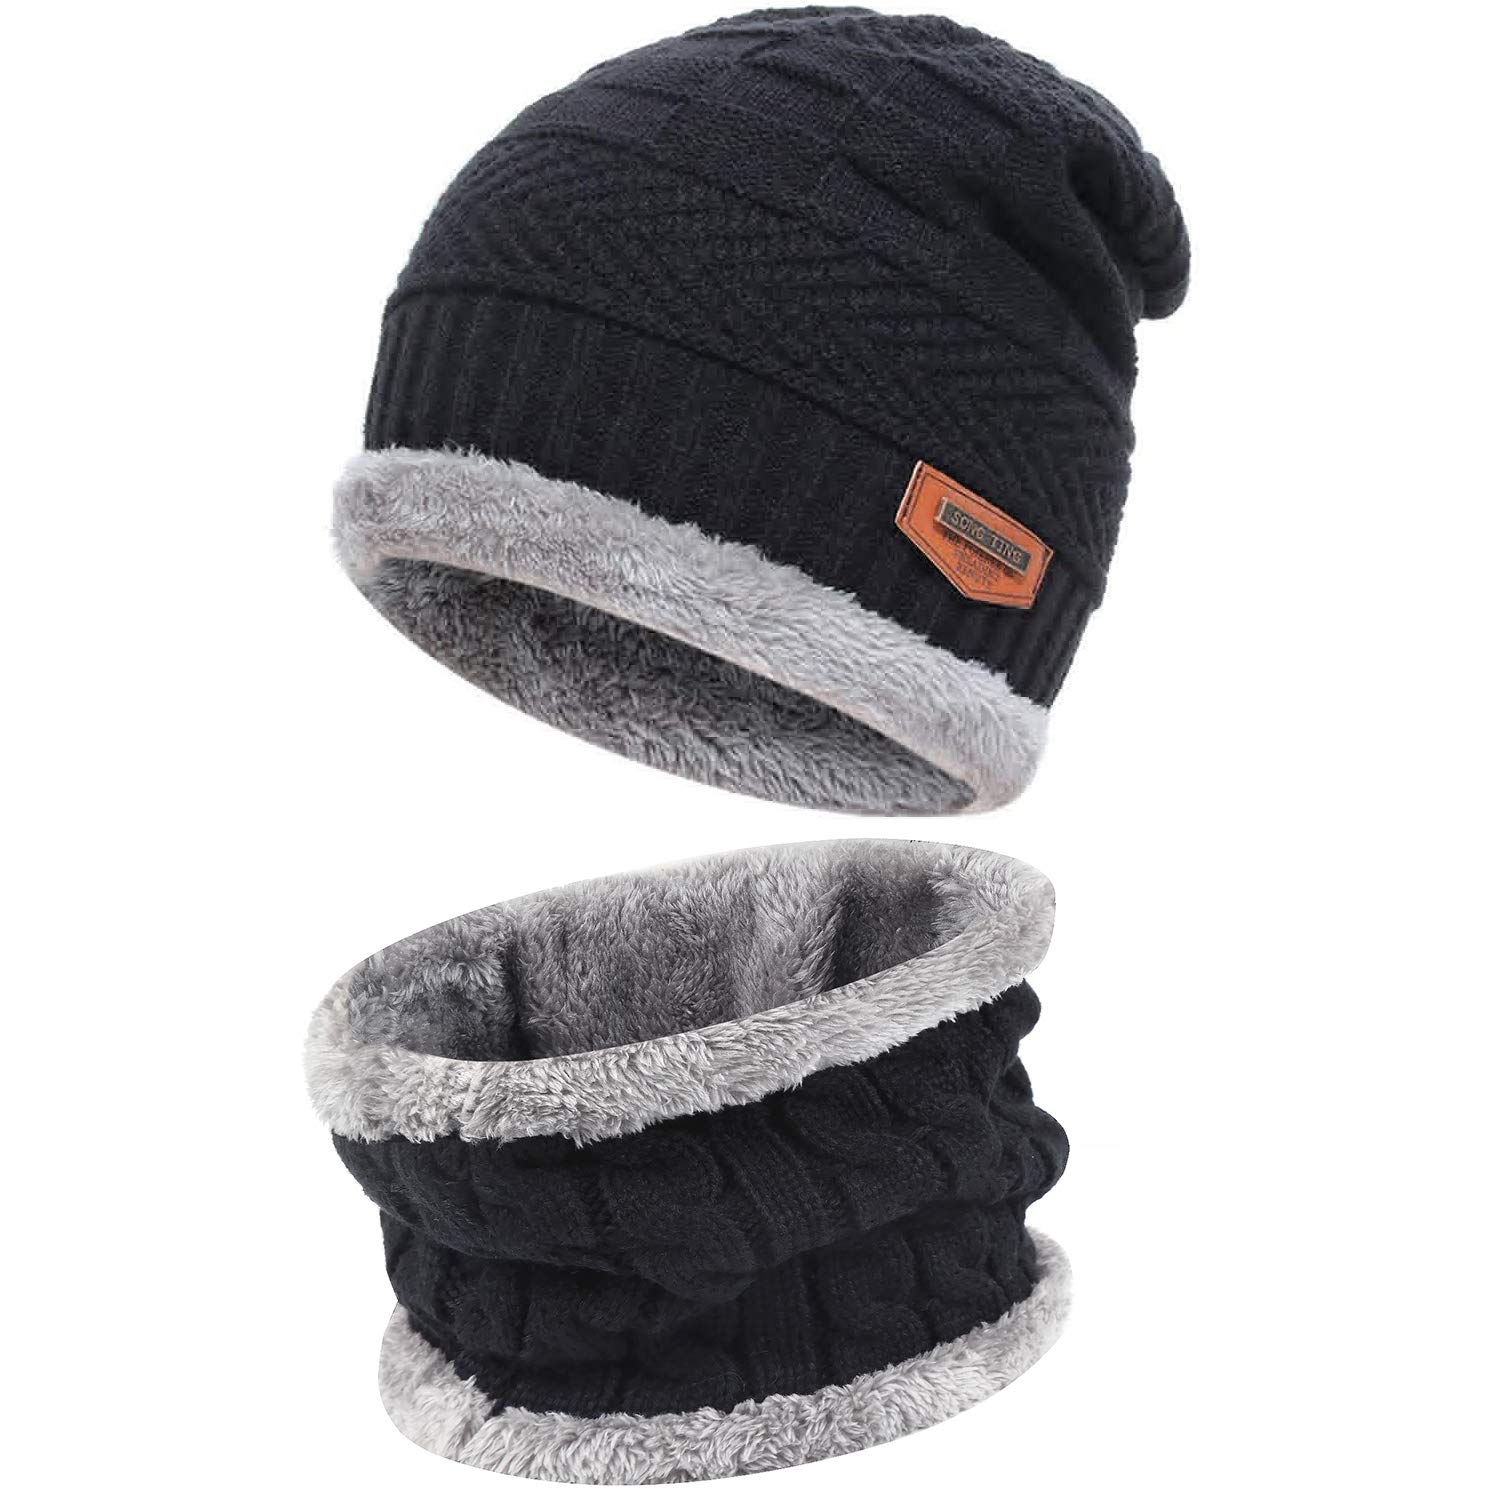 Mens Womens Winter Beanie Chic Hat Scarf Set Warm Knit Hat Thick Fleece Lined Winter Cap